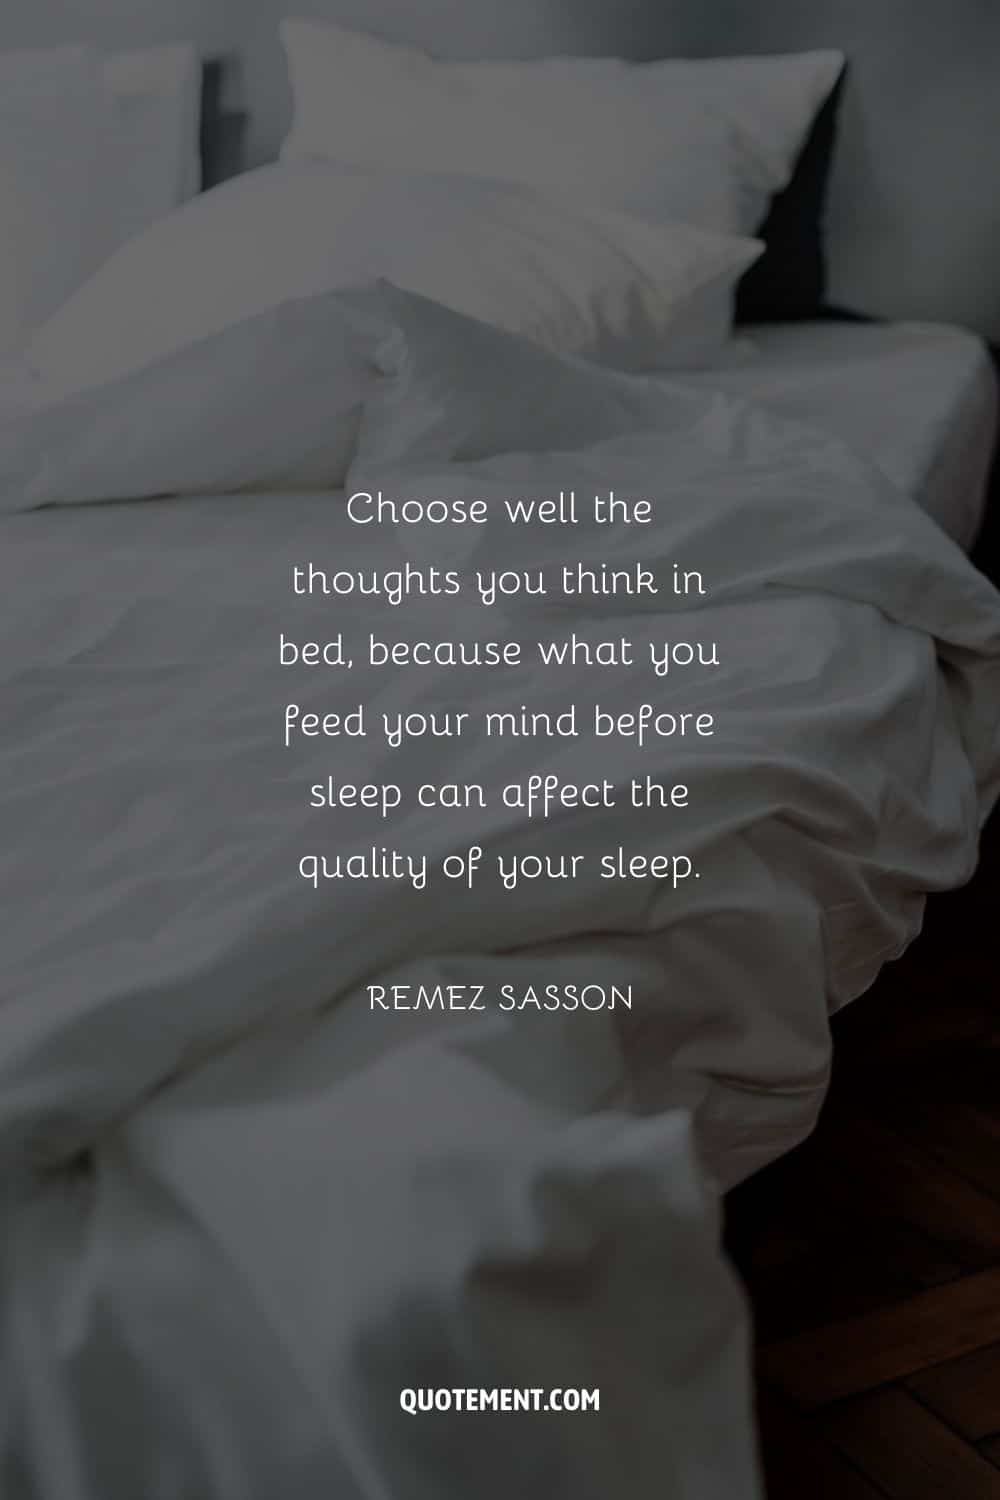 Choose well the thoughts you think in bed, because what you feed your mind before sleep can affect the quality of your sleep.